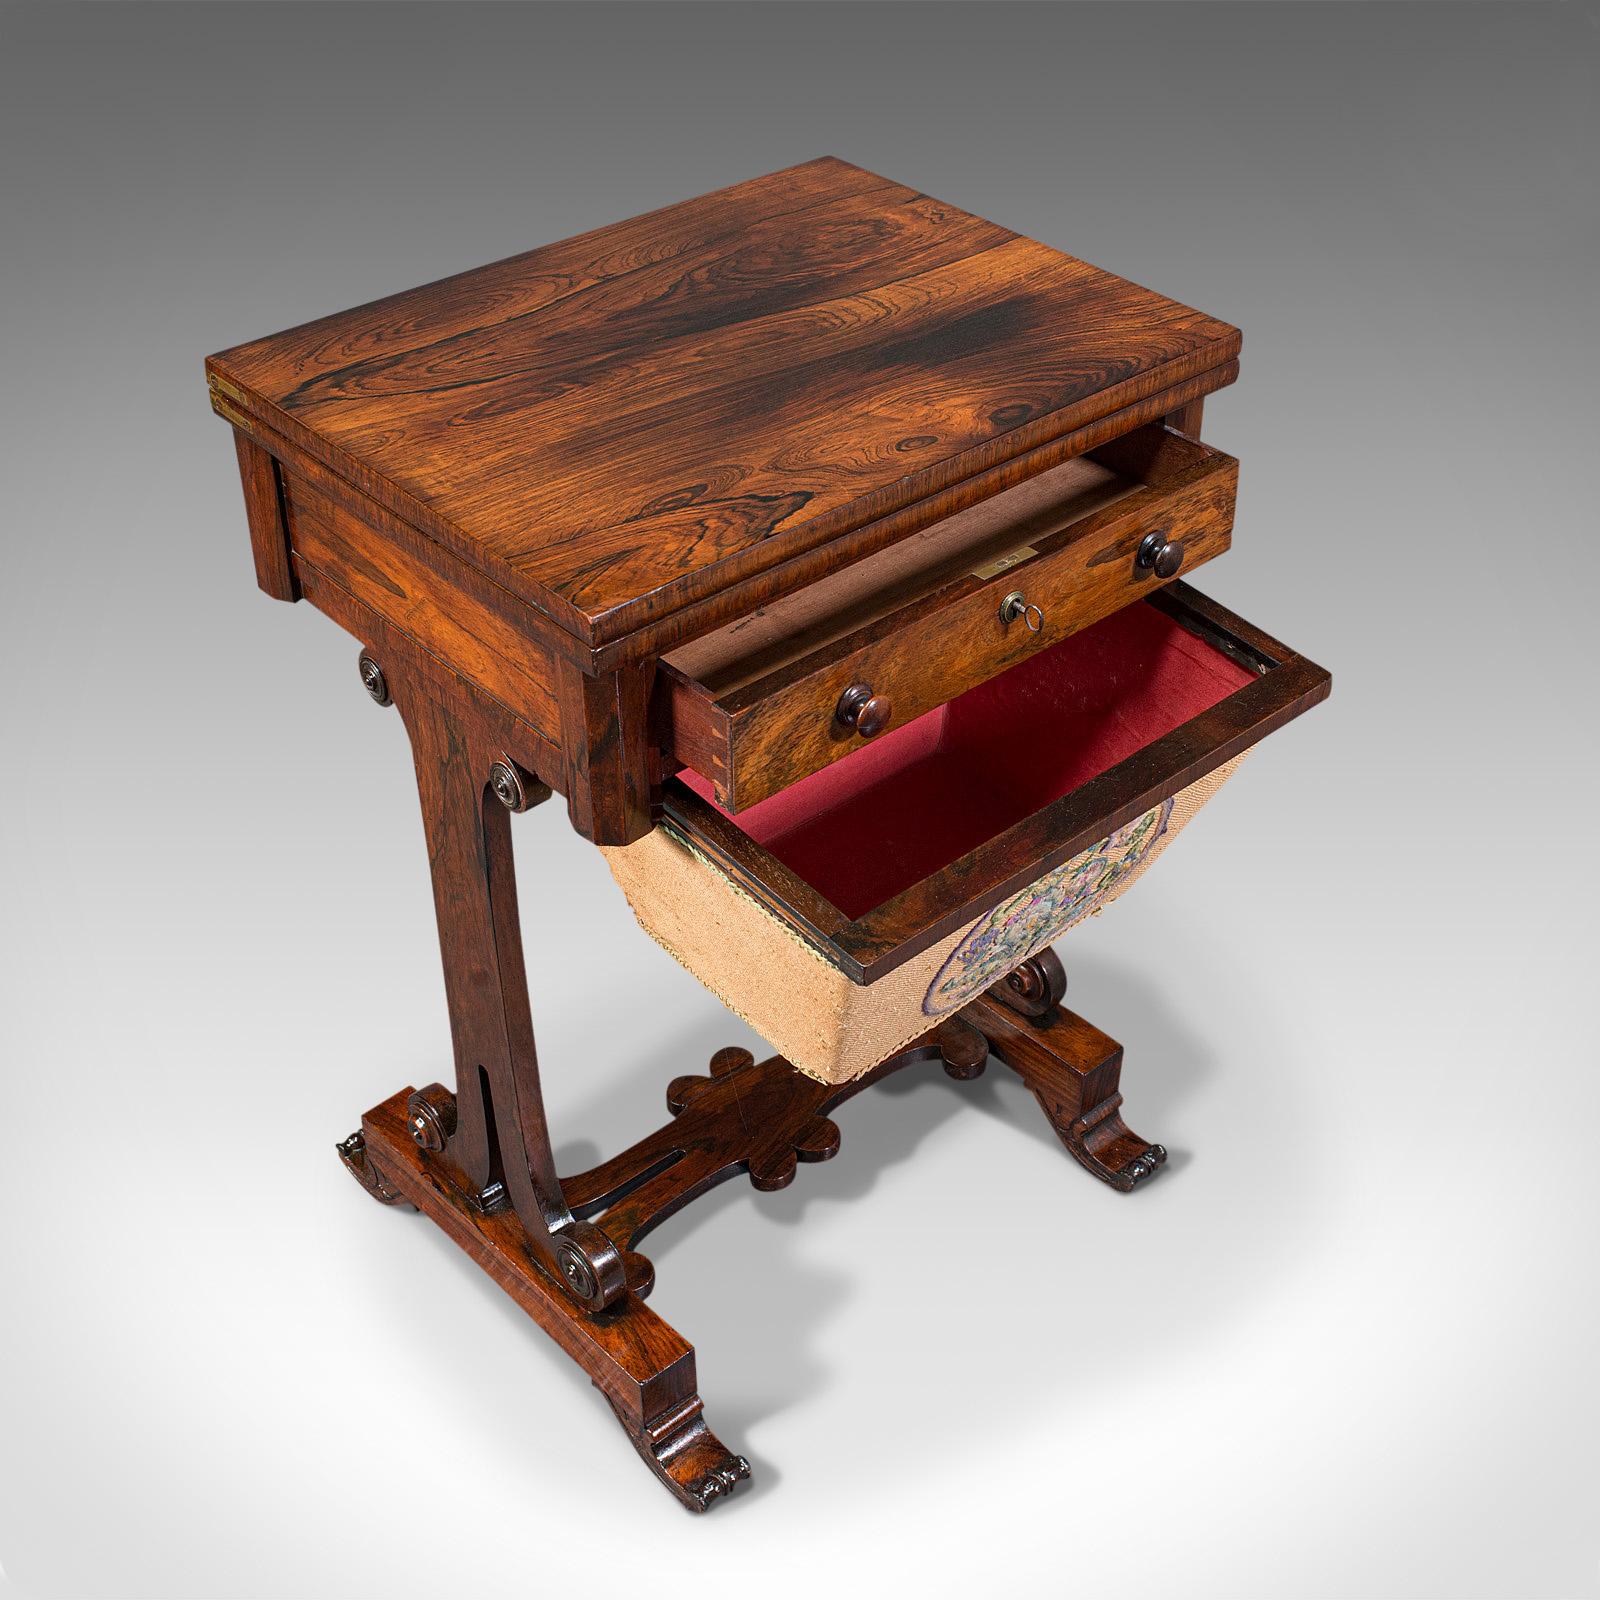 19th Century Antique Fold Over Games Table, English, Rosewood, Chess, Cards, Regency, C.1820 For Sale